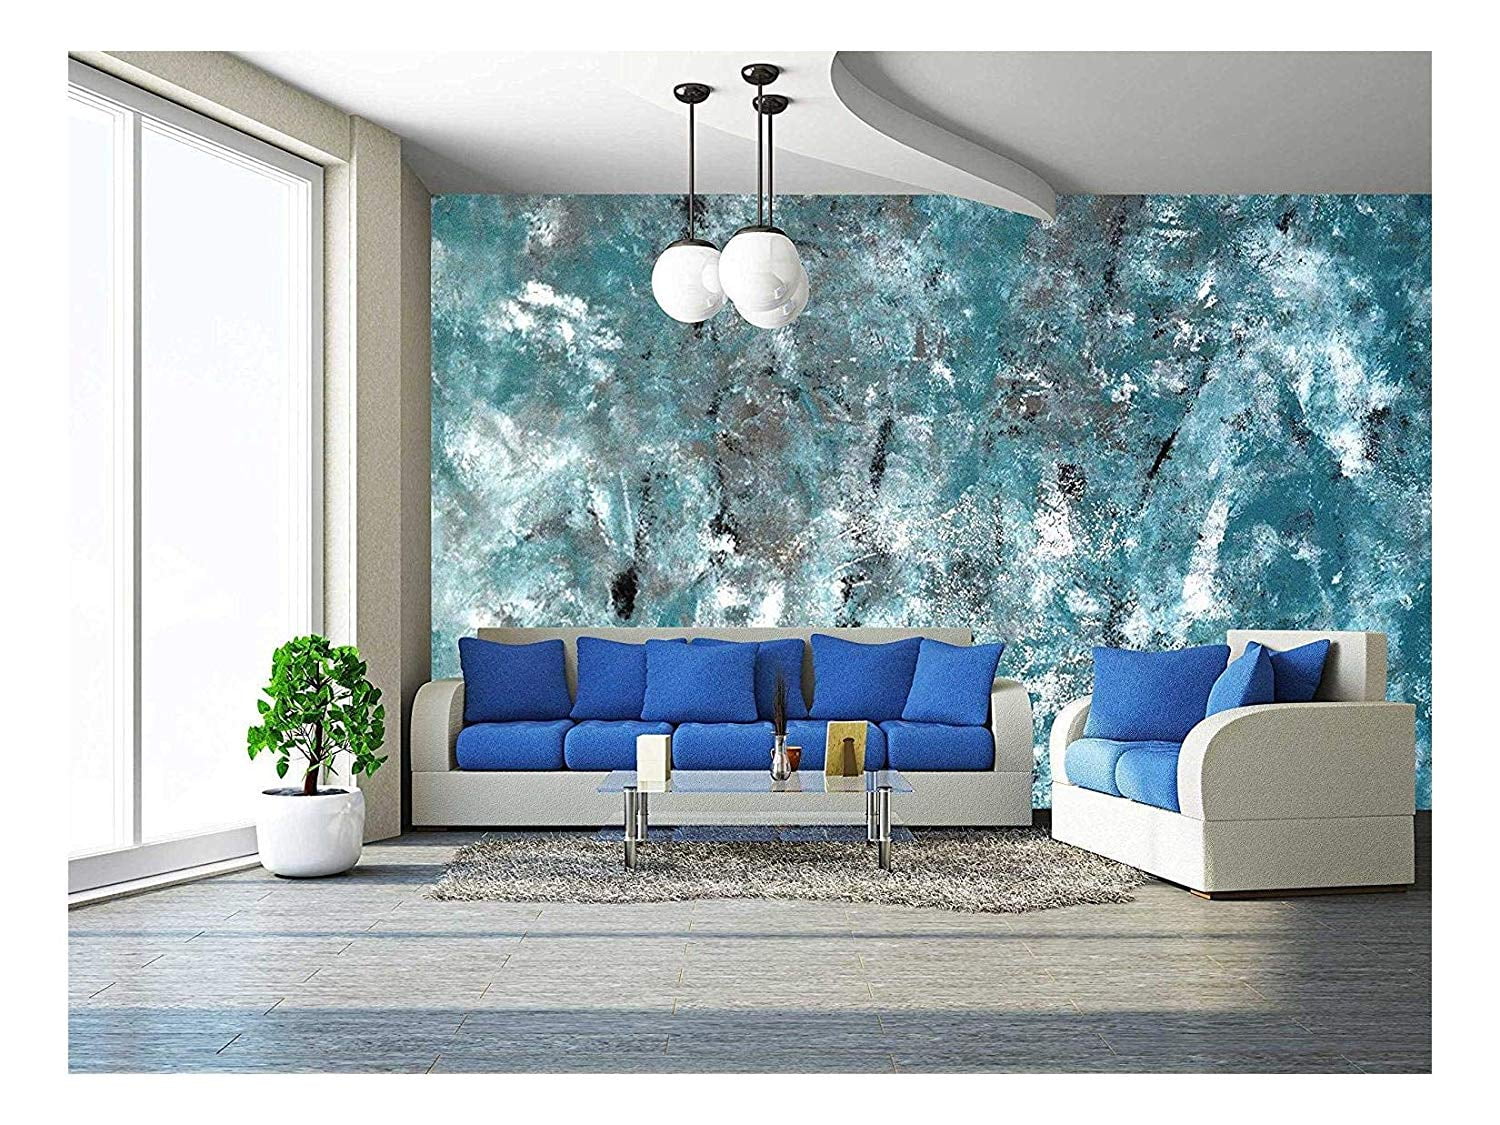 wall26 Teal and Grey Abstract Art Painting Removable